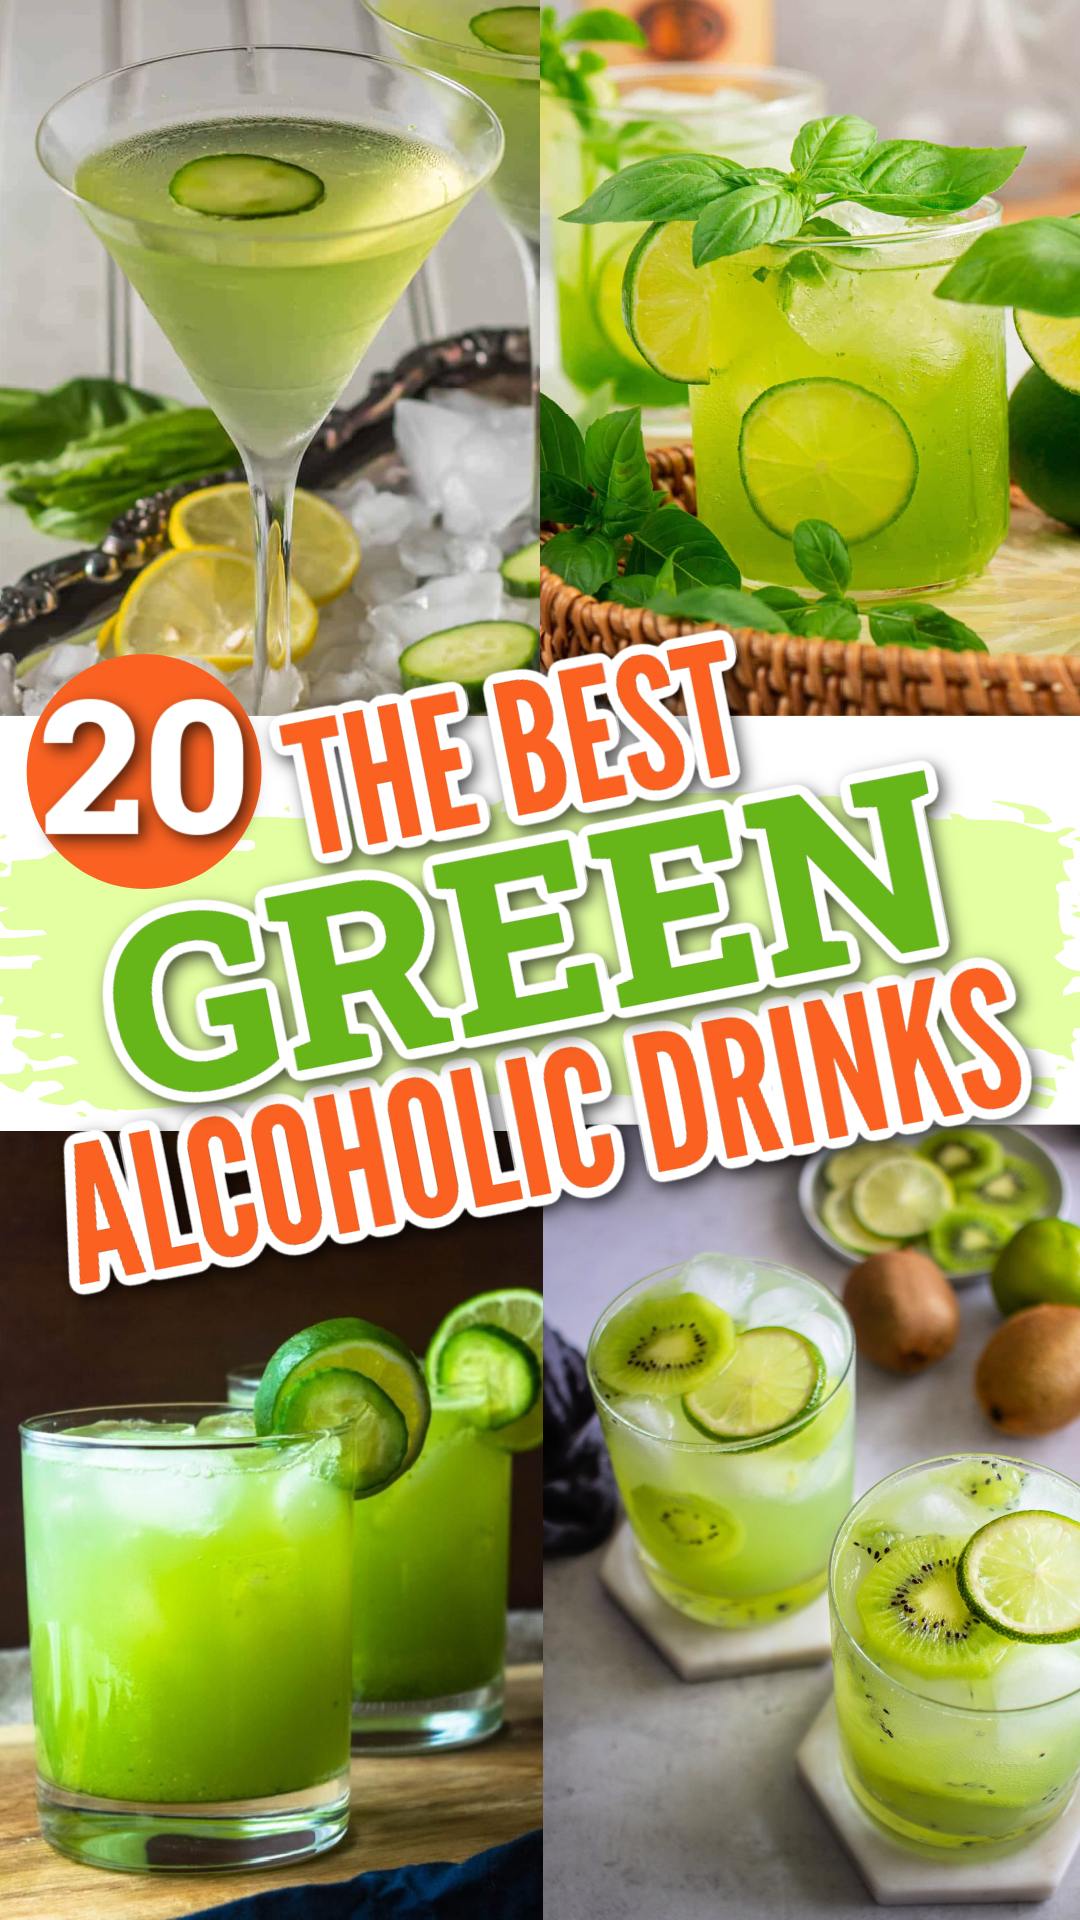 The Best Green Alcoholic Drinks